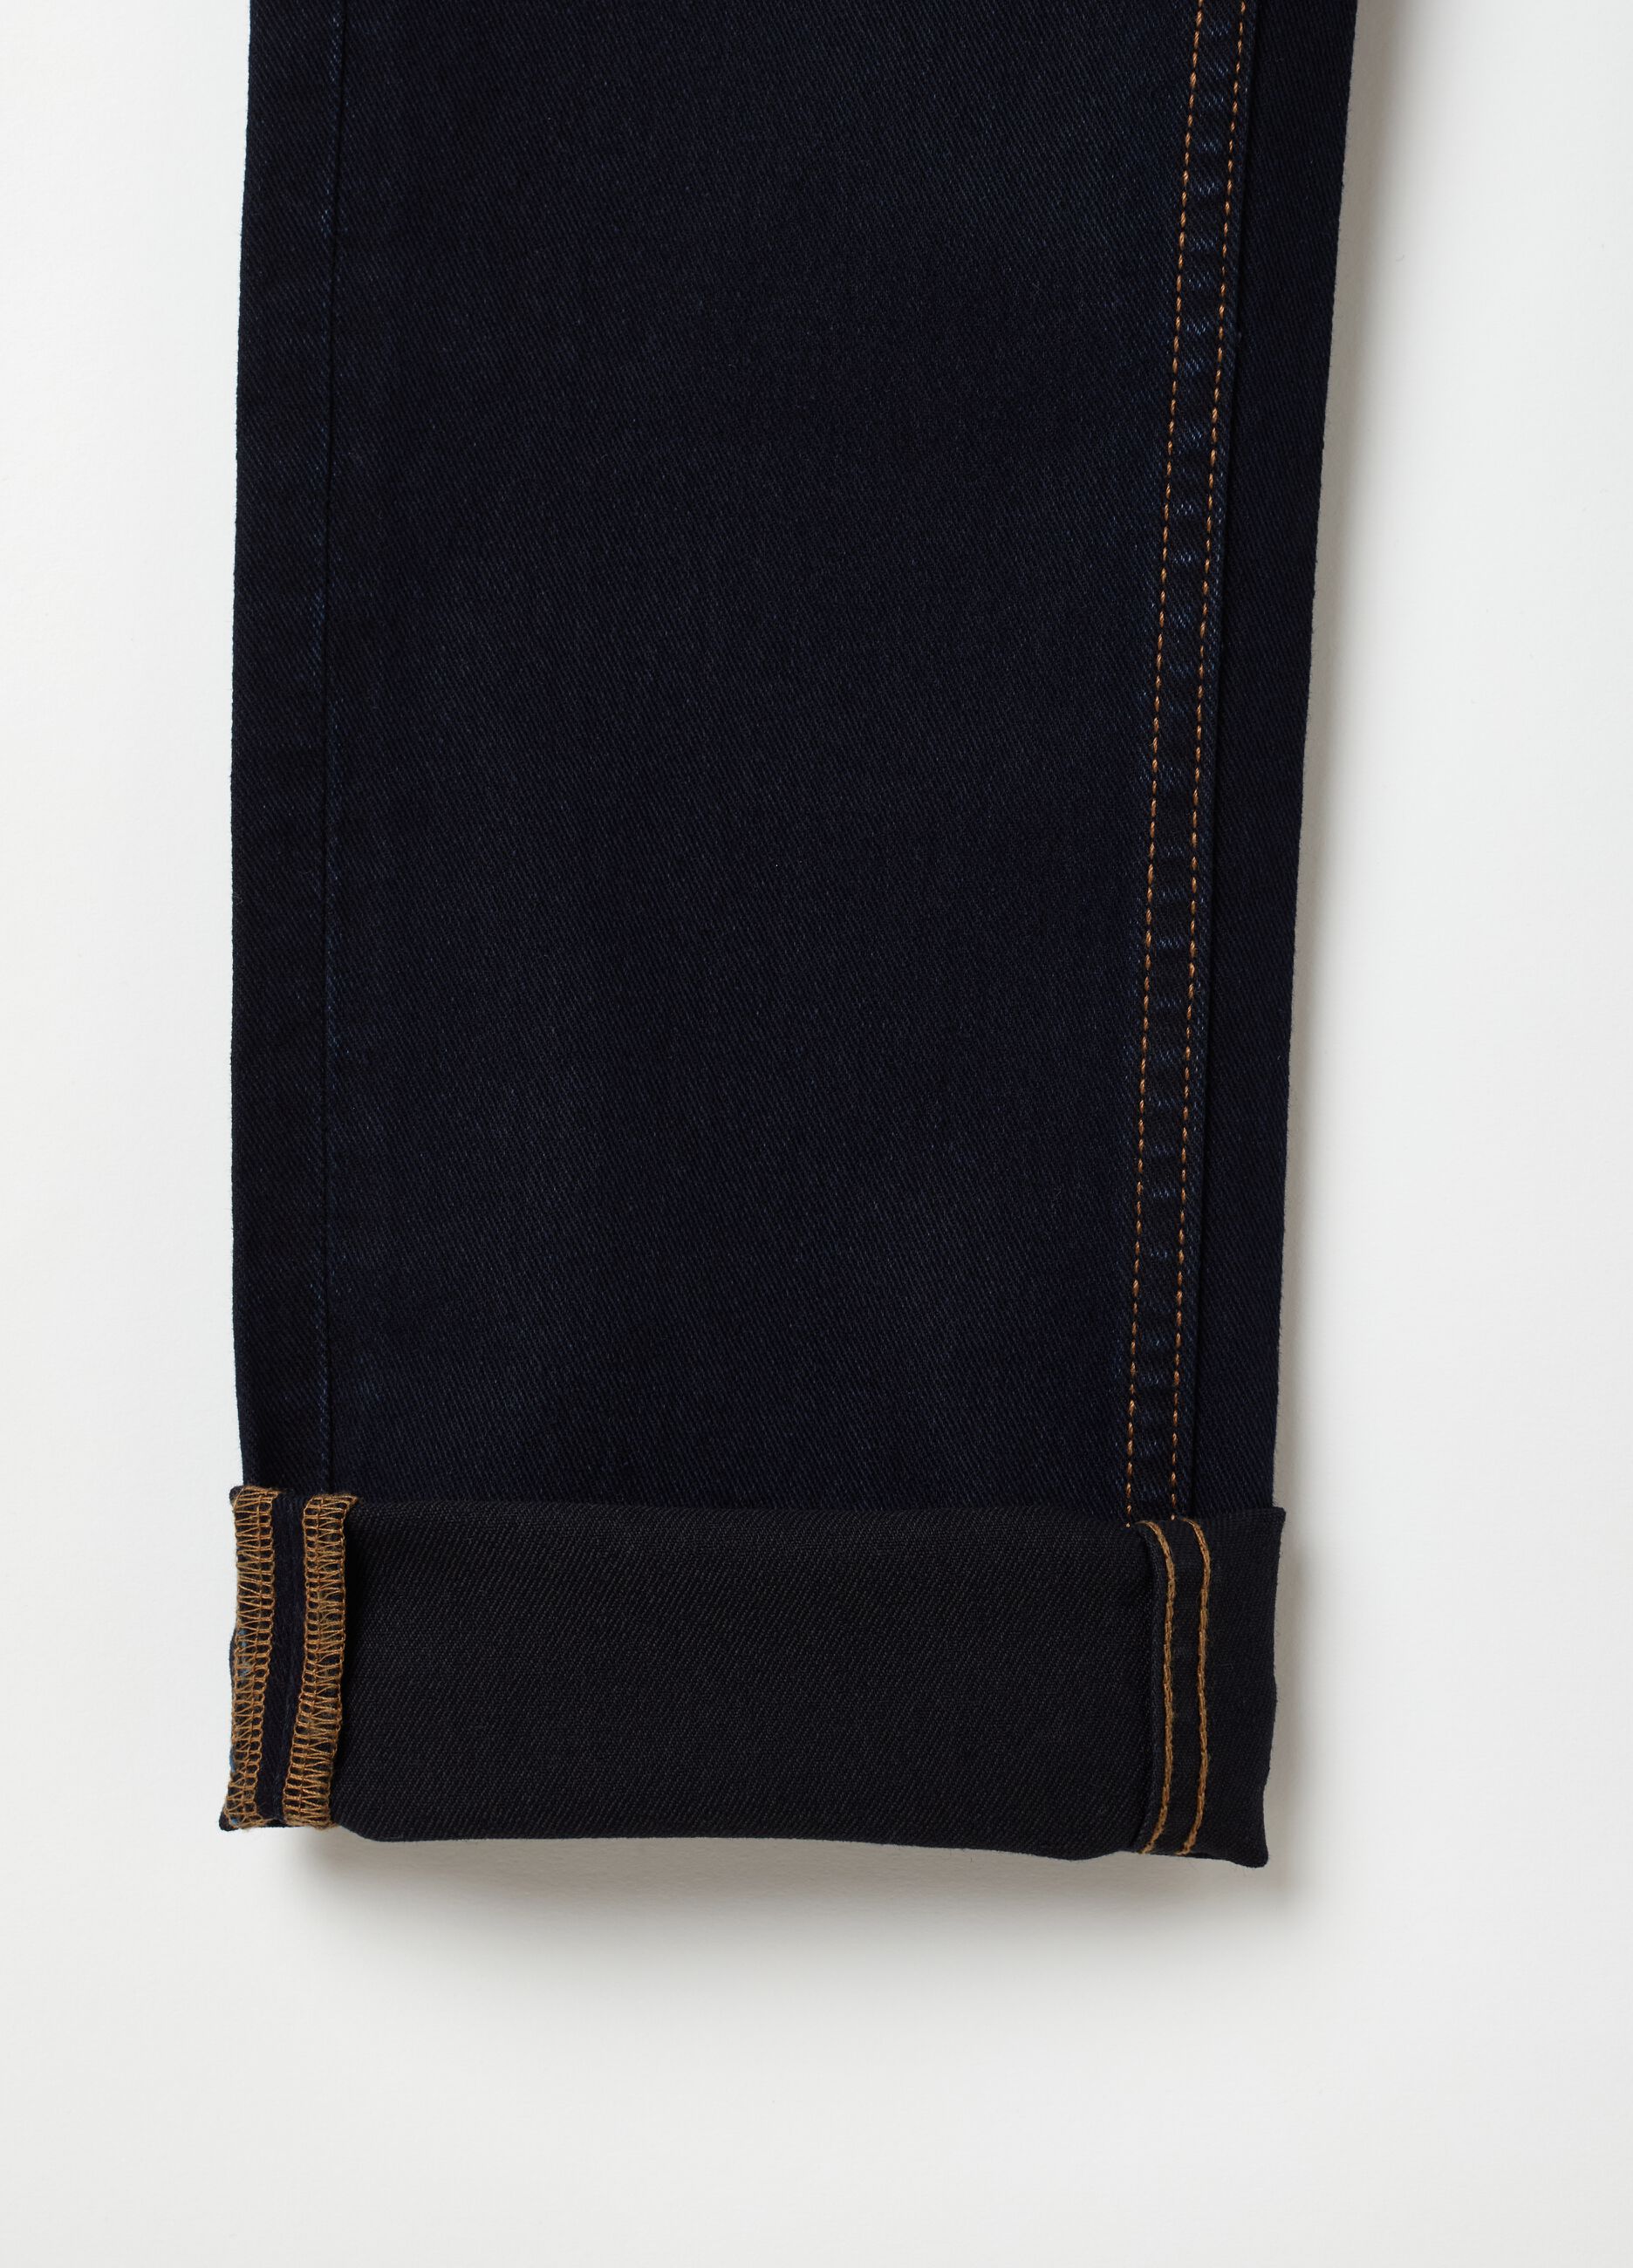 Regular-fit jeans with five pockets